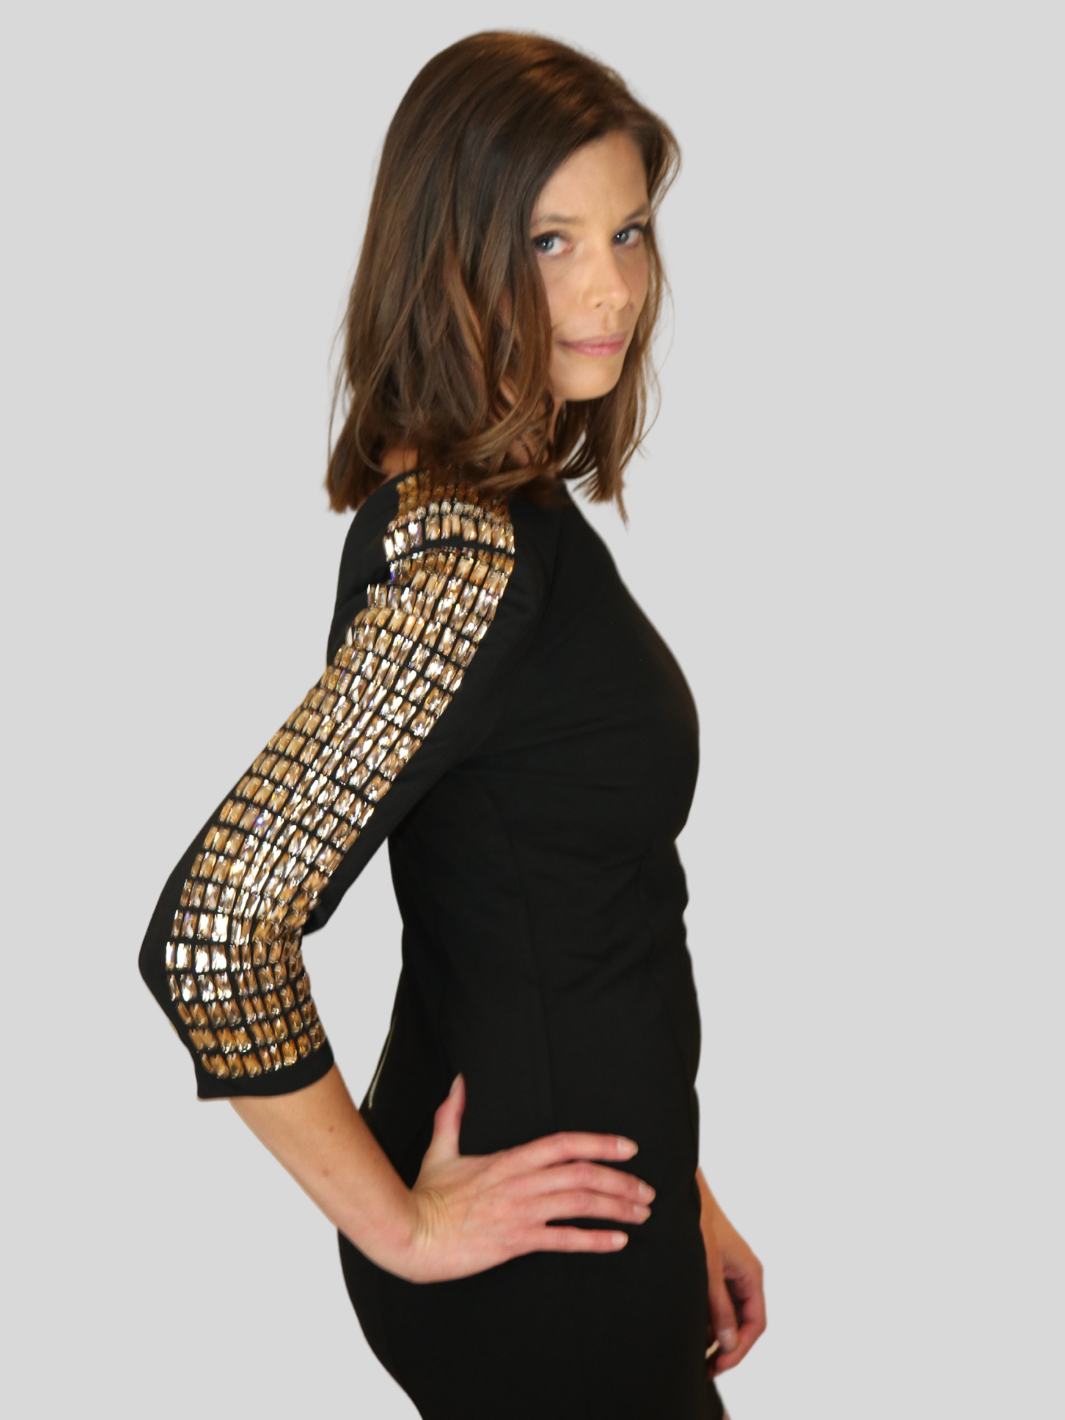 4ever Stunning Deluxe Premium black midi dress with gold rhinestone jeweled arms and chunky gold back zip fastening. Model stands to the side with her rihnestone jeweled sleeve visible. Model turns her head so that she is looking into the camera.